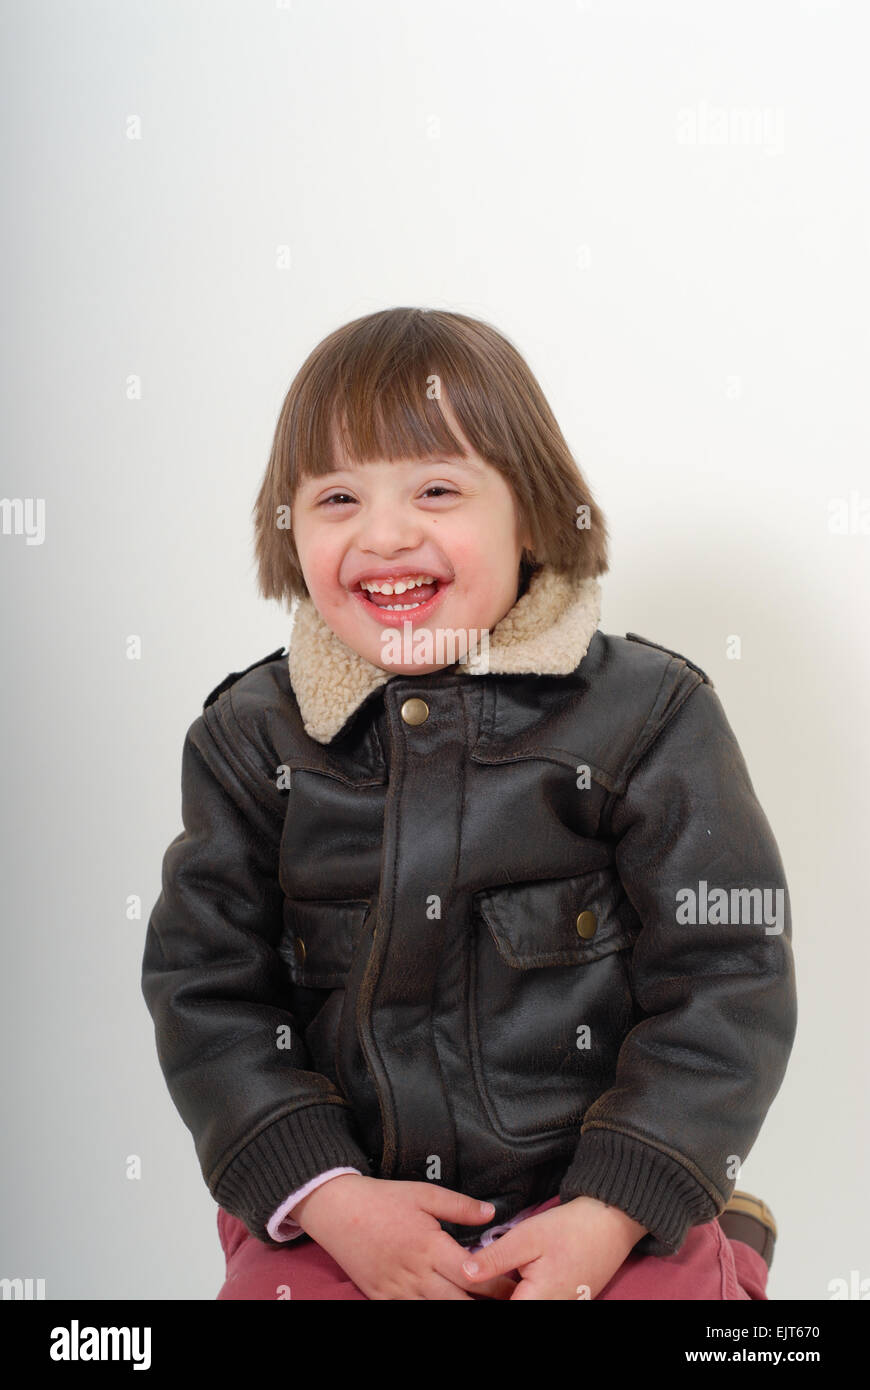 Boy with down syndrome laughing. Isolated on white background. Stock Photo